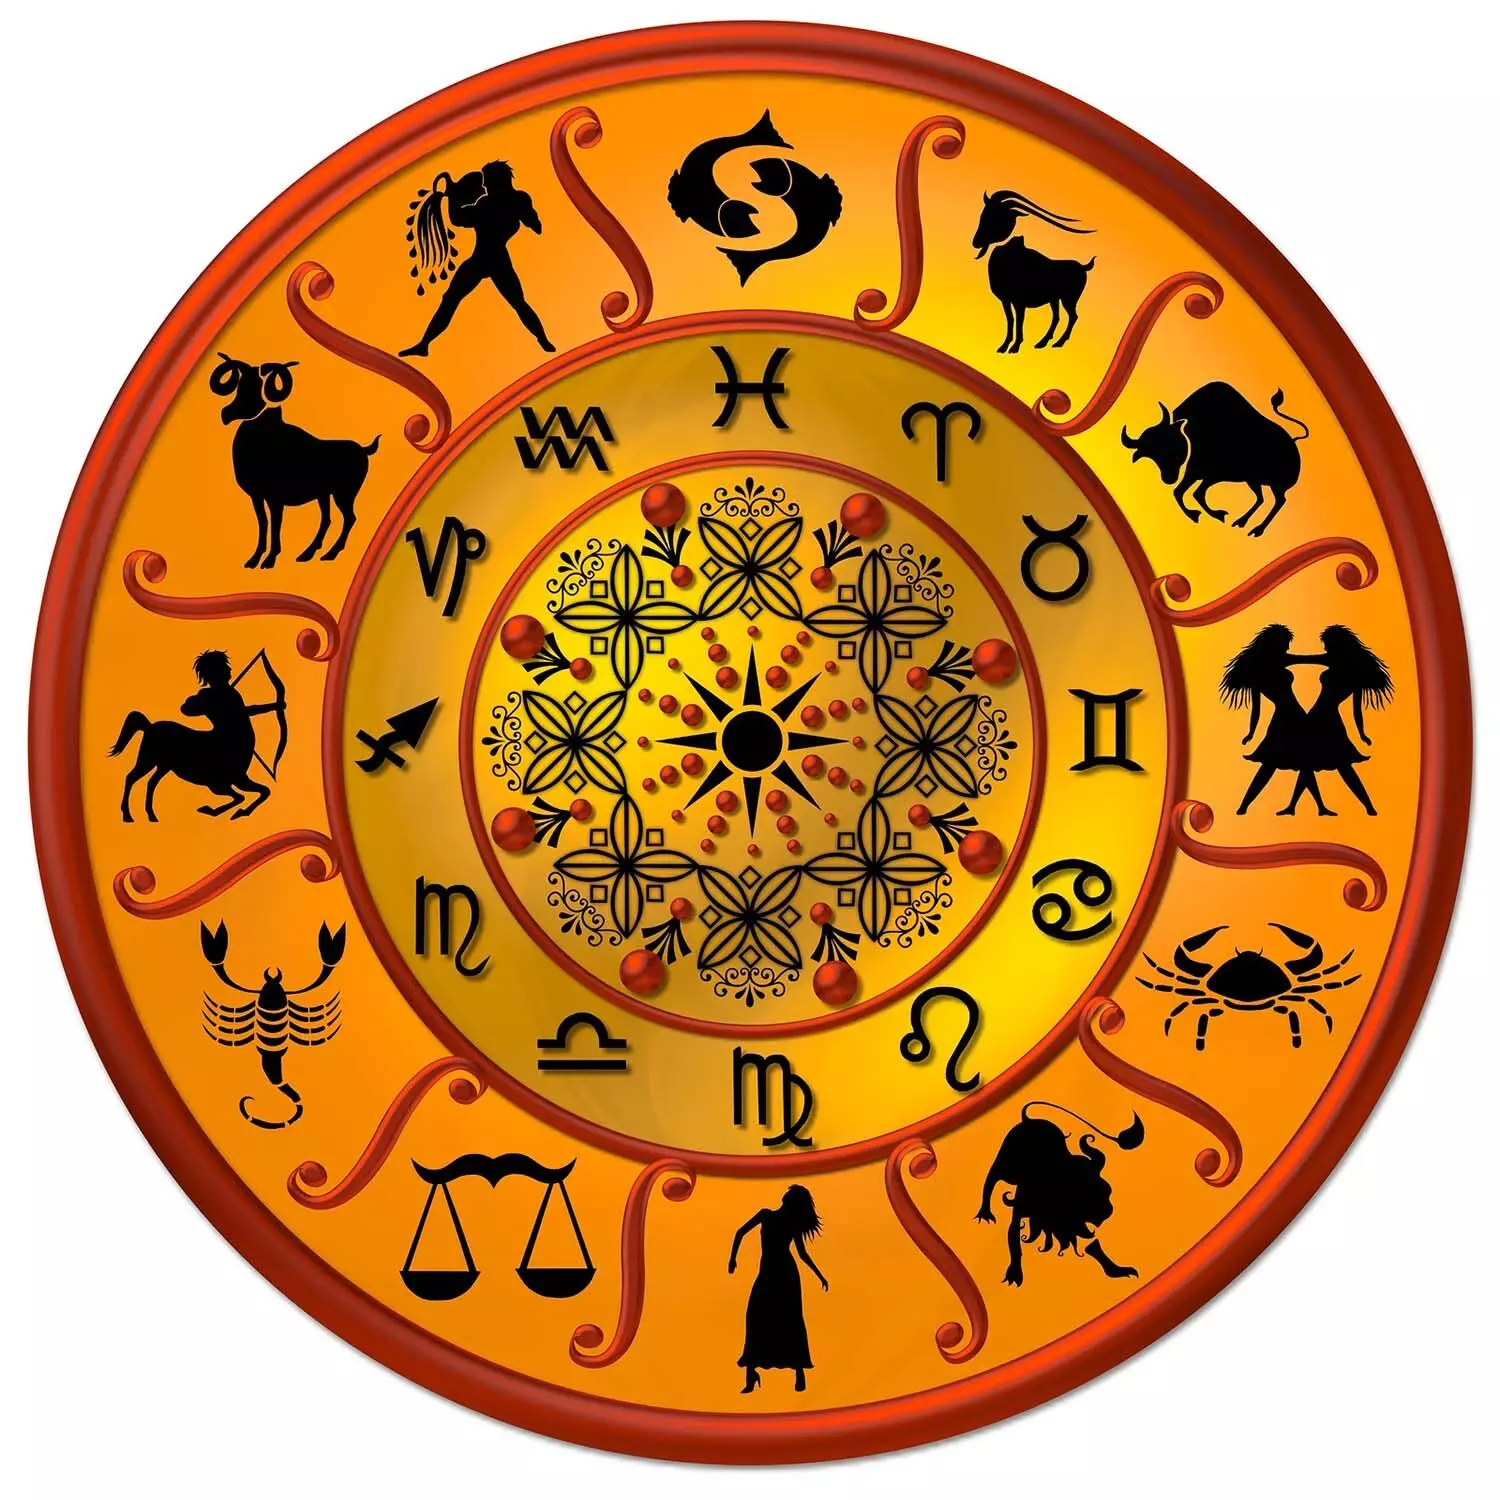 14 July – Know your todays horoscope